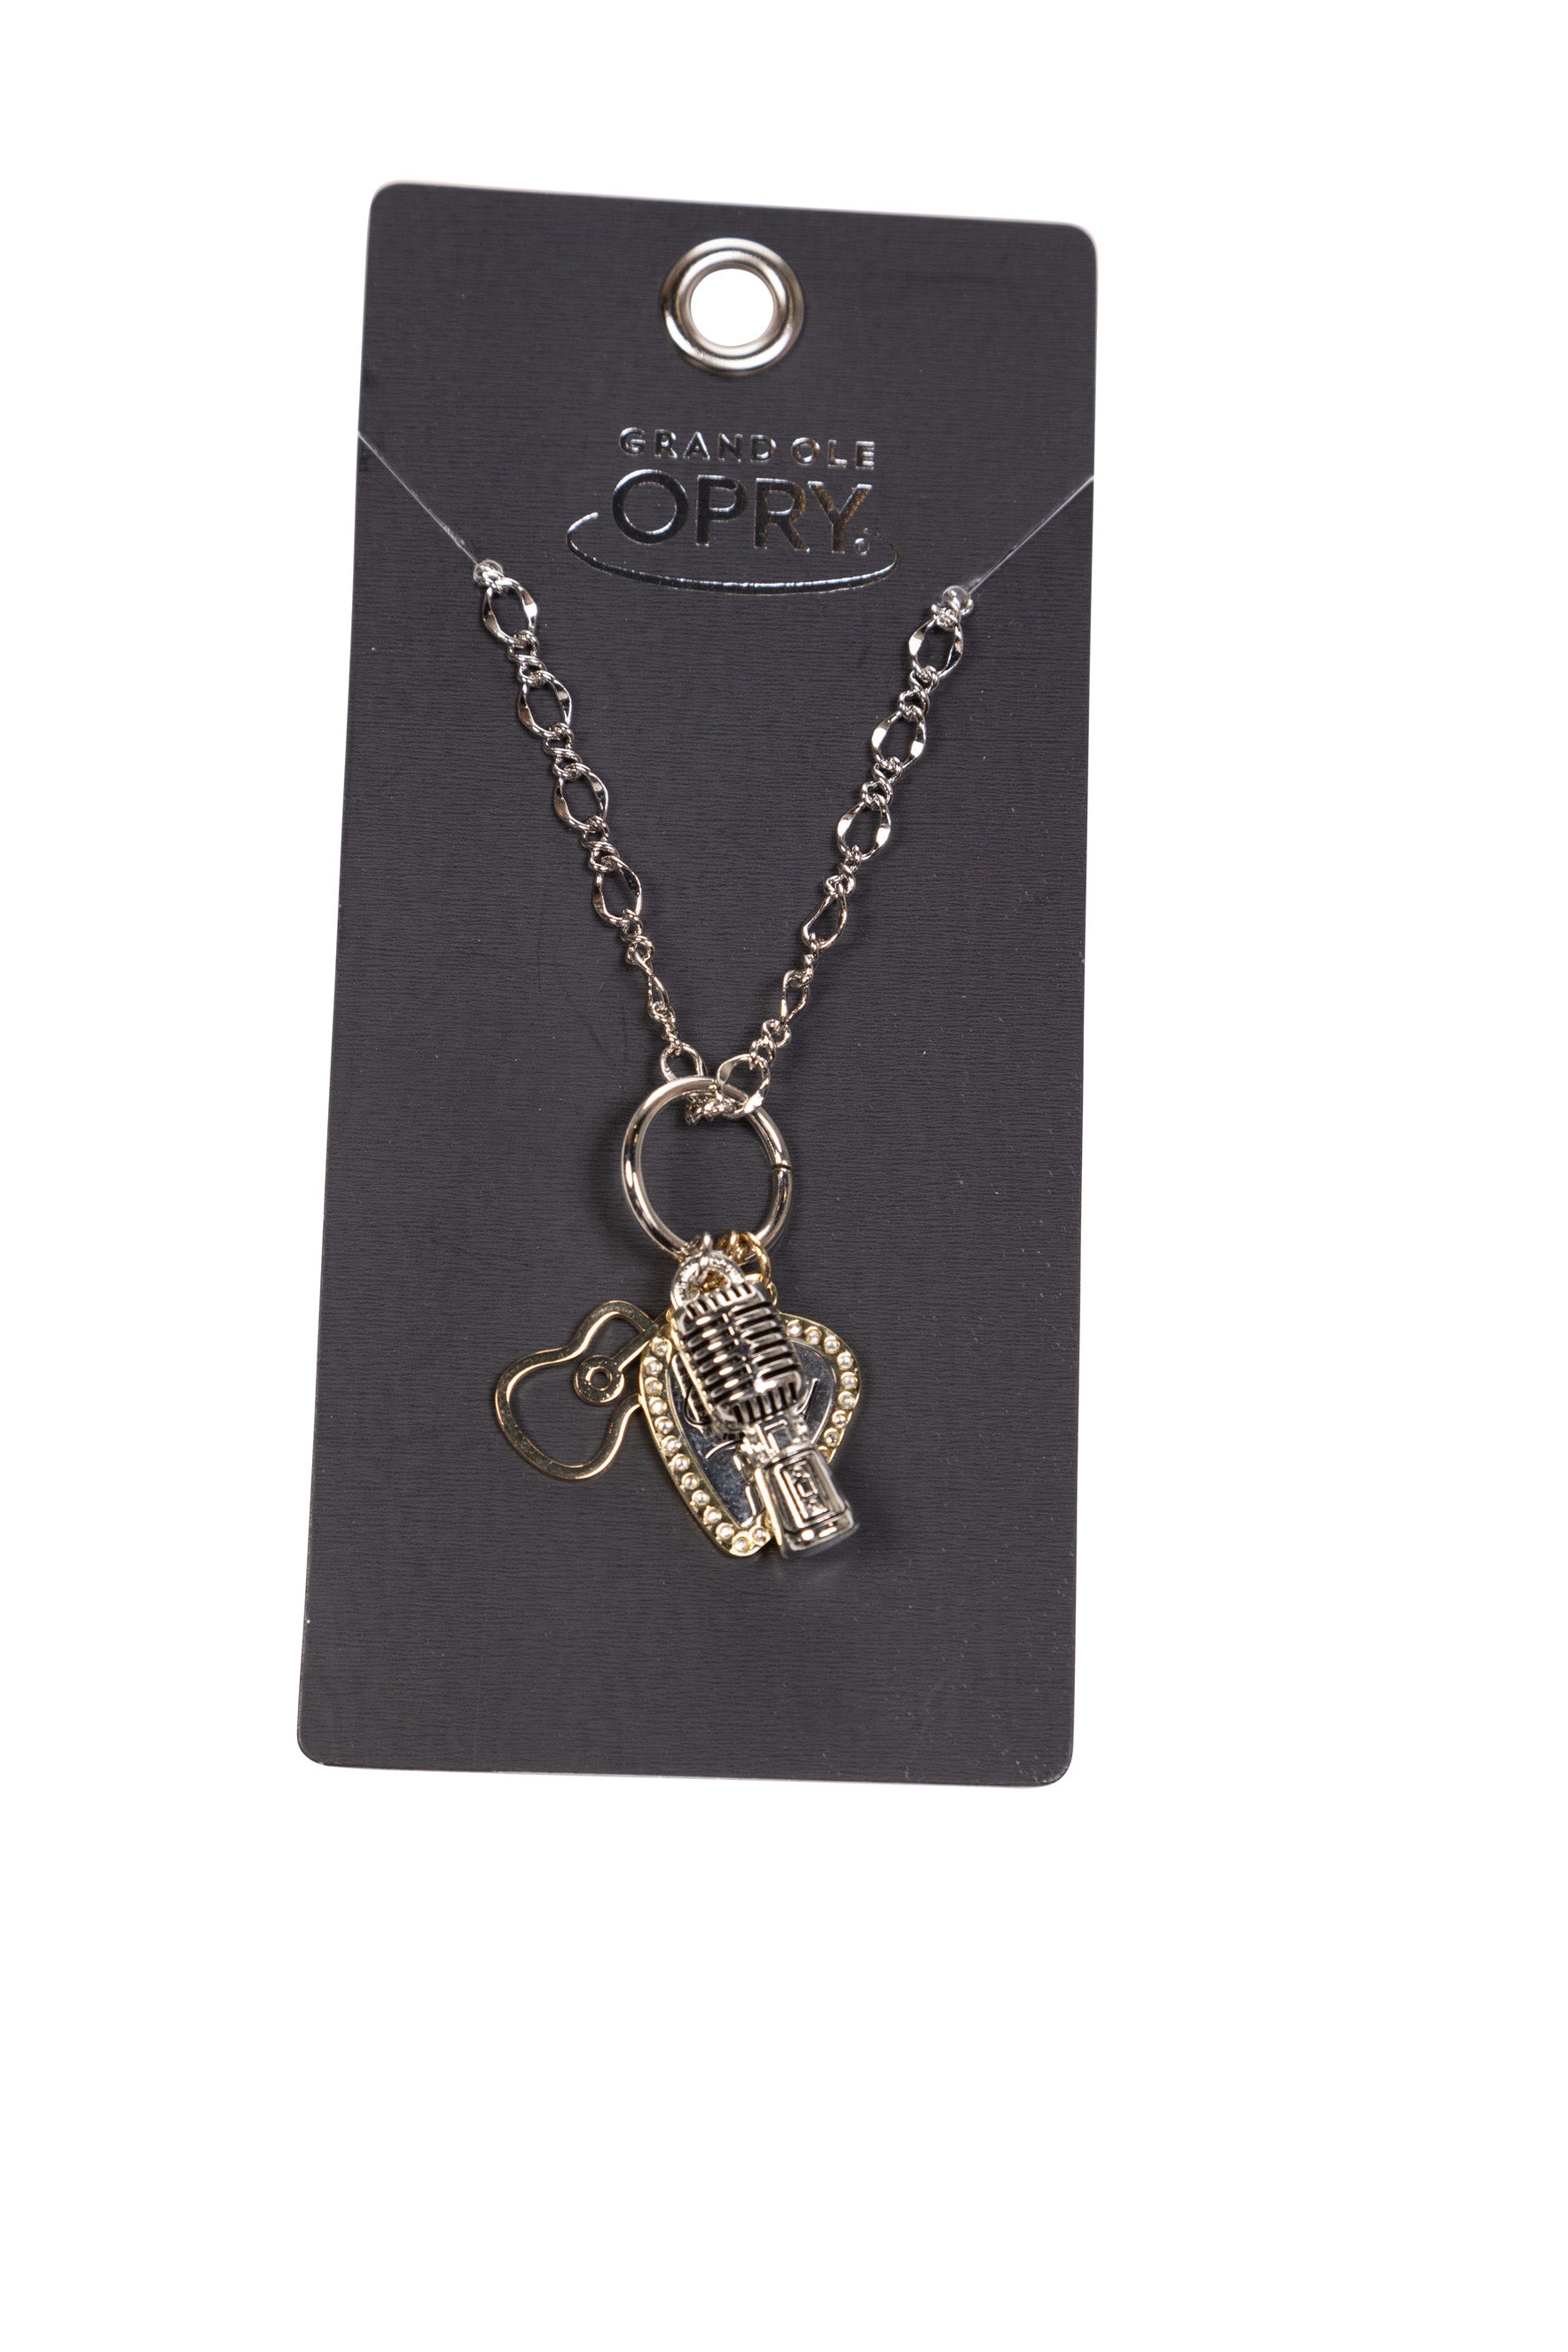 Opry Mixed Metal Charm Necklace